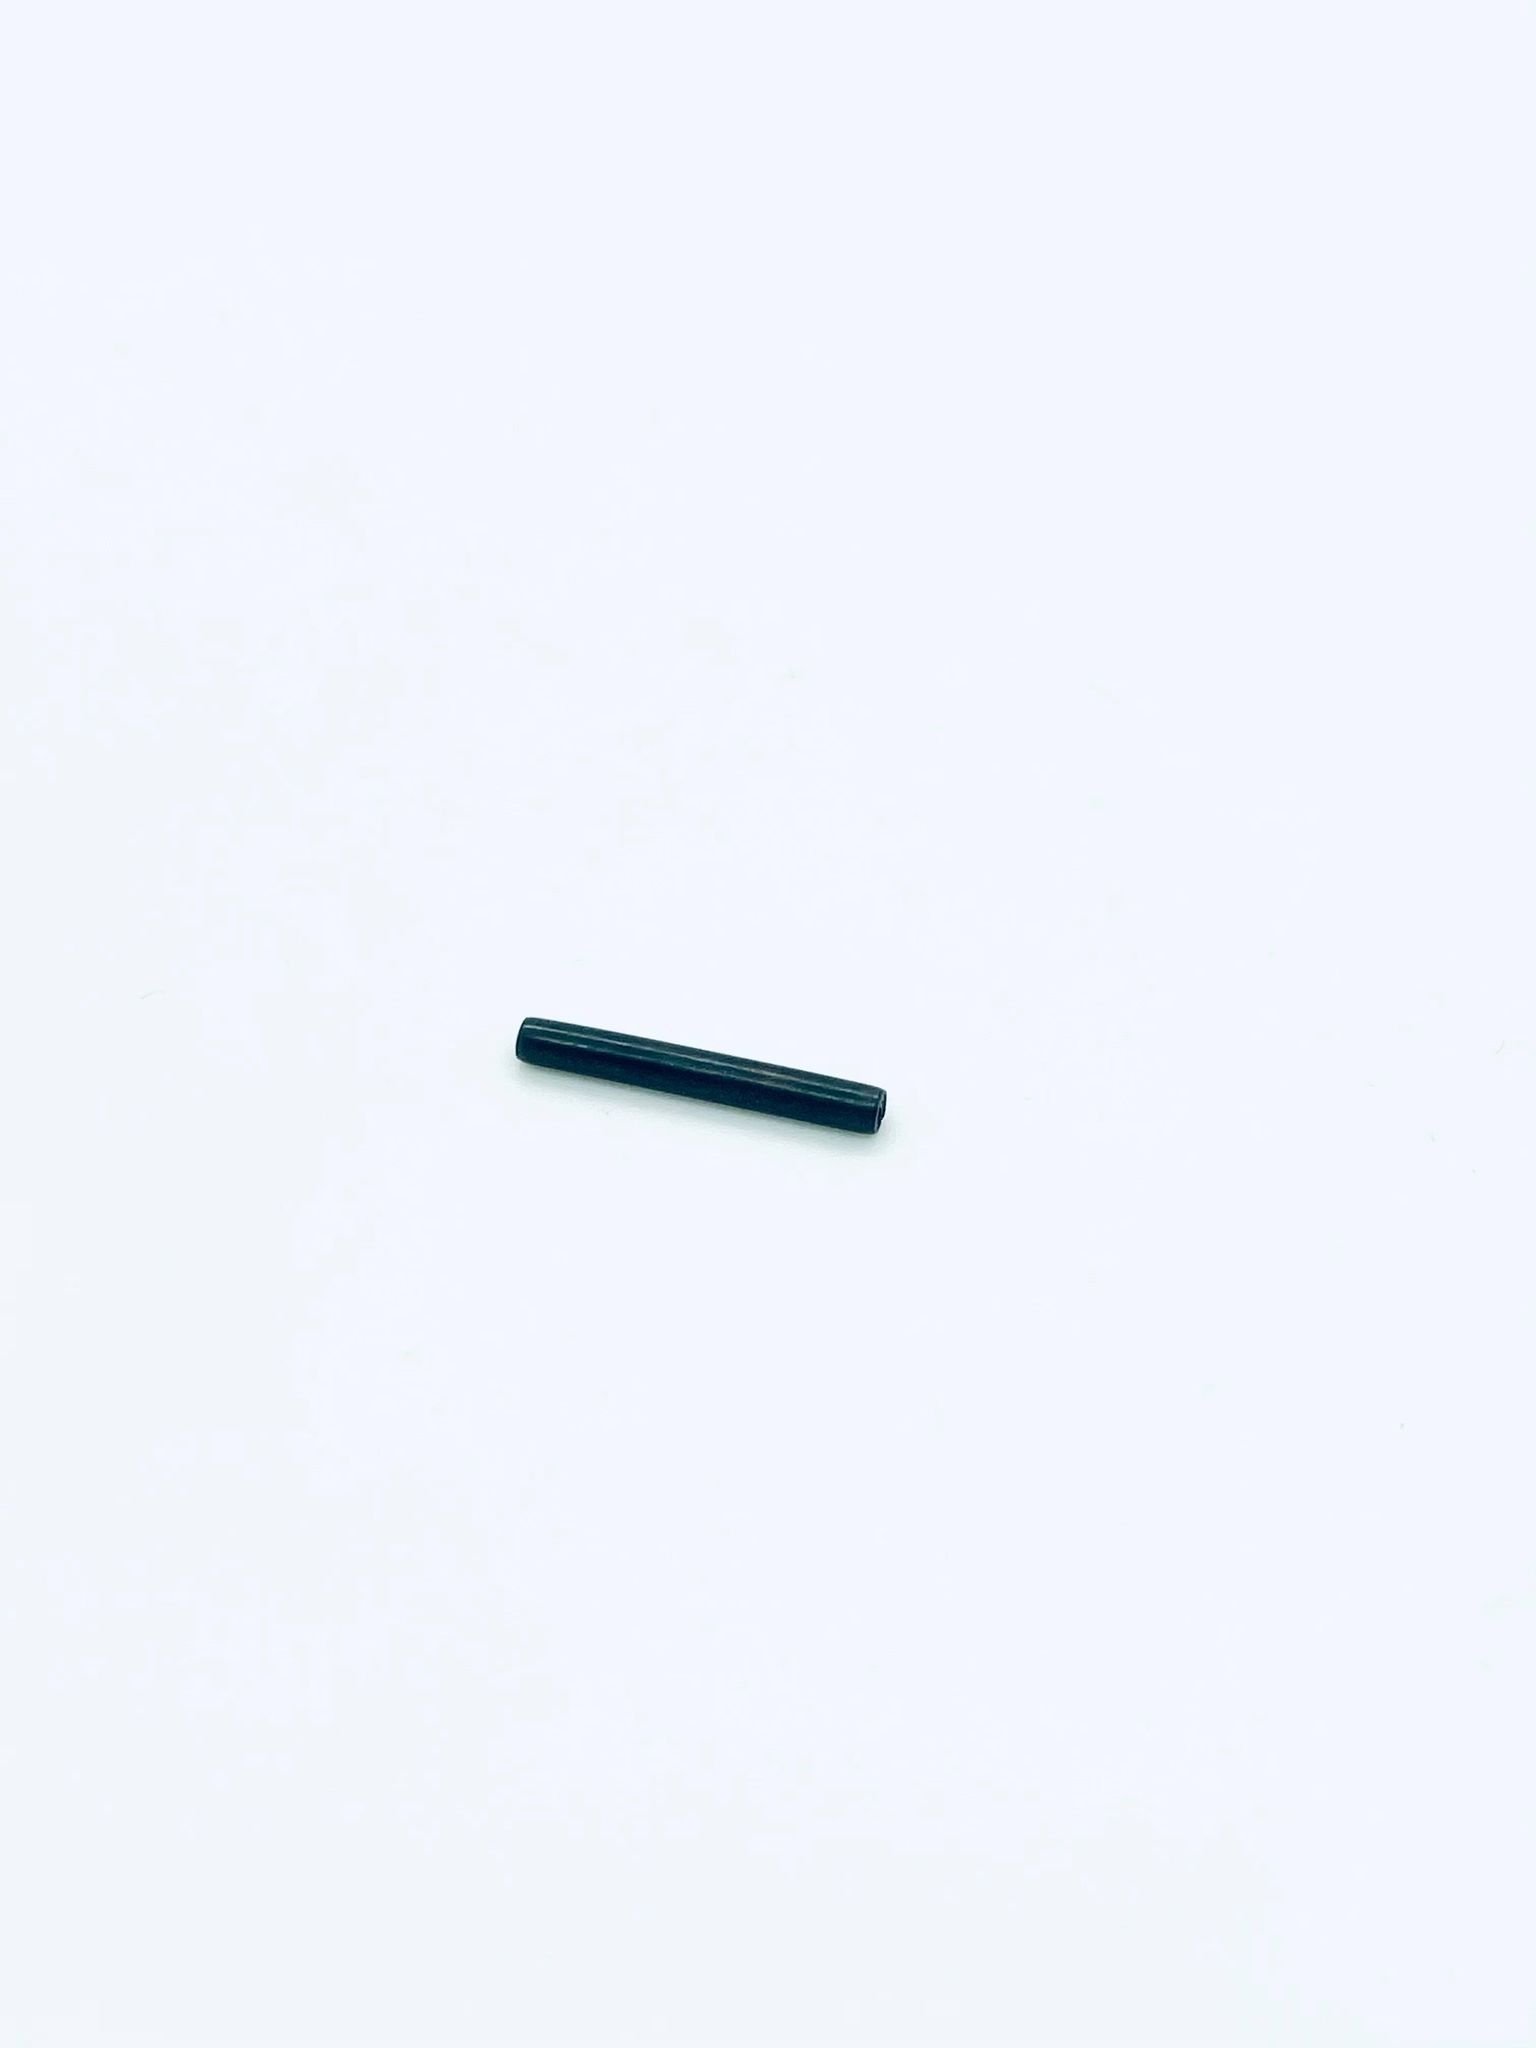 Coiled spring pin, 2,5mmx20mm, P320